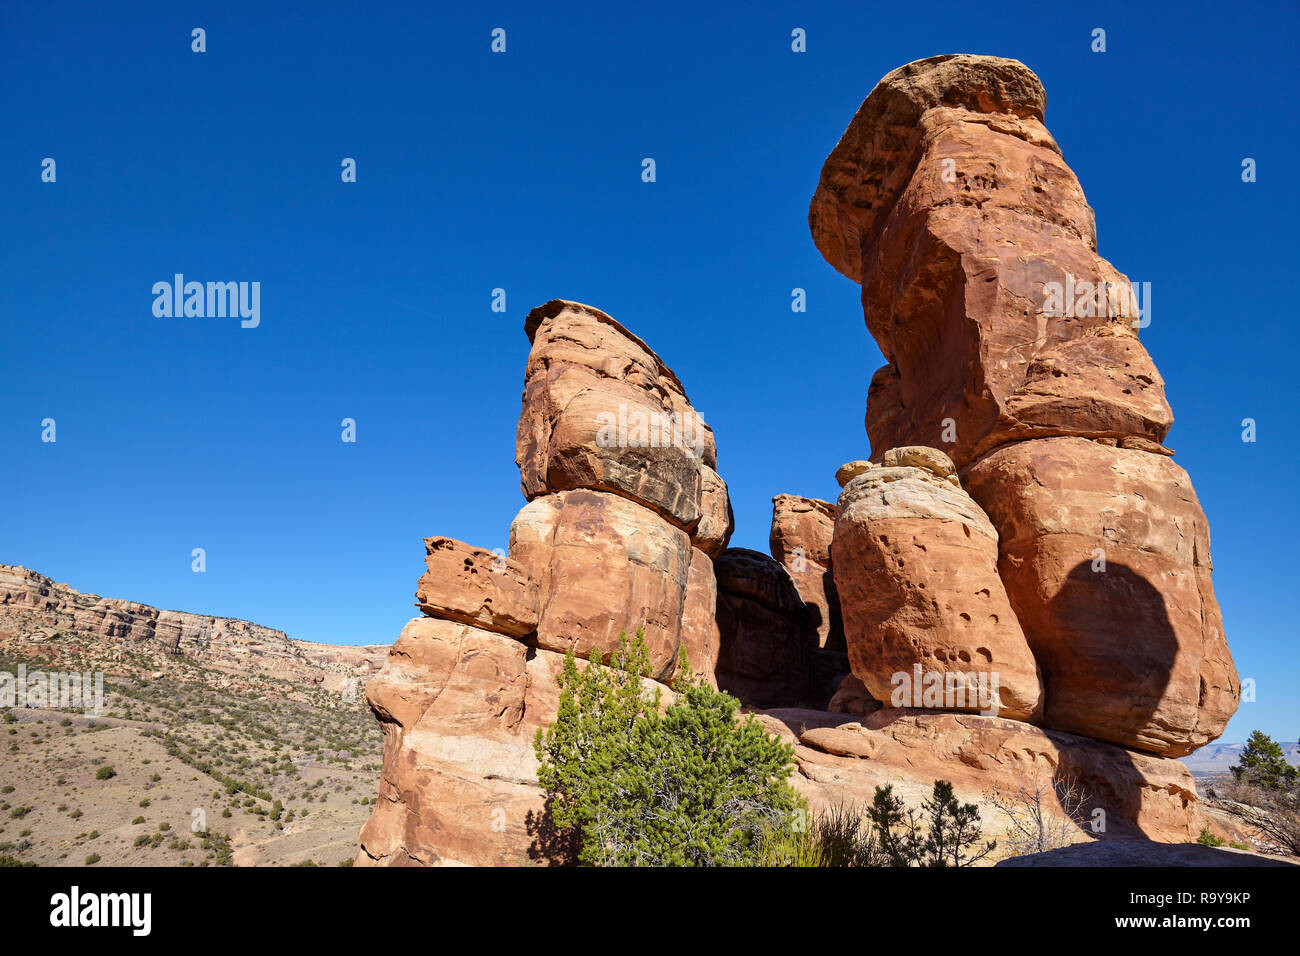 Rock formations in the Colorado National Monument Park, Colorado, USA. Stock Photo